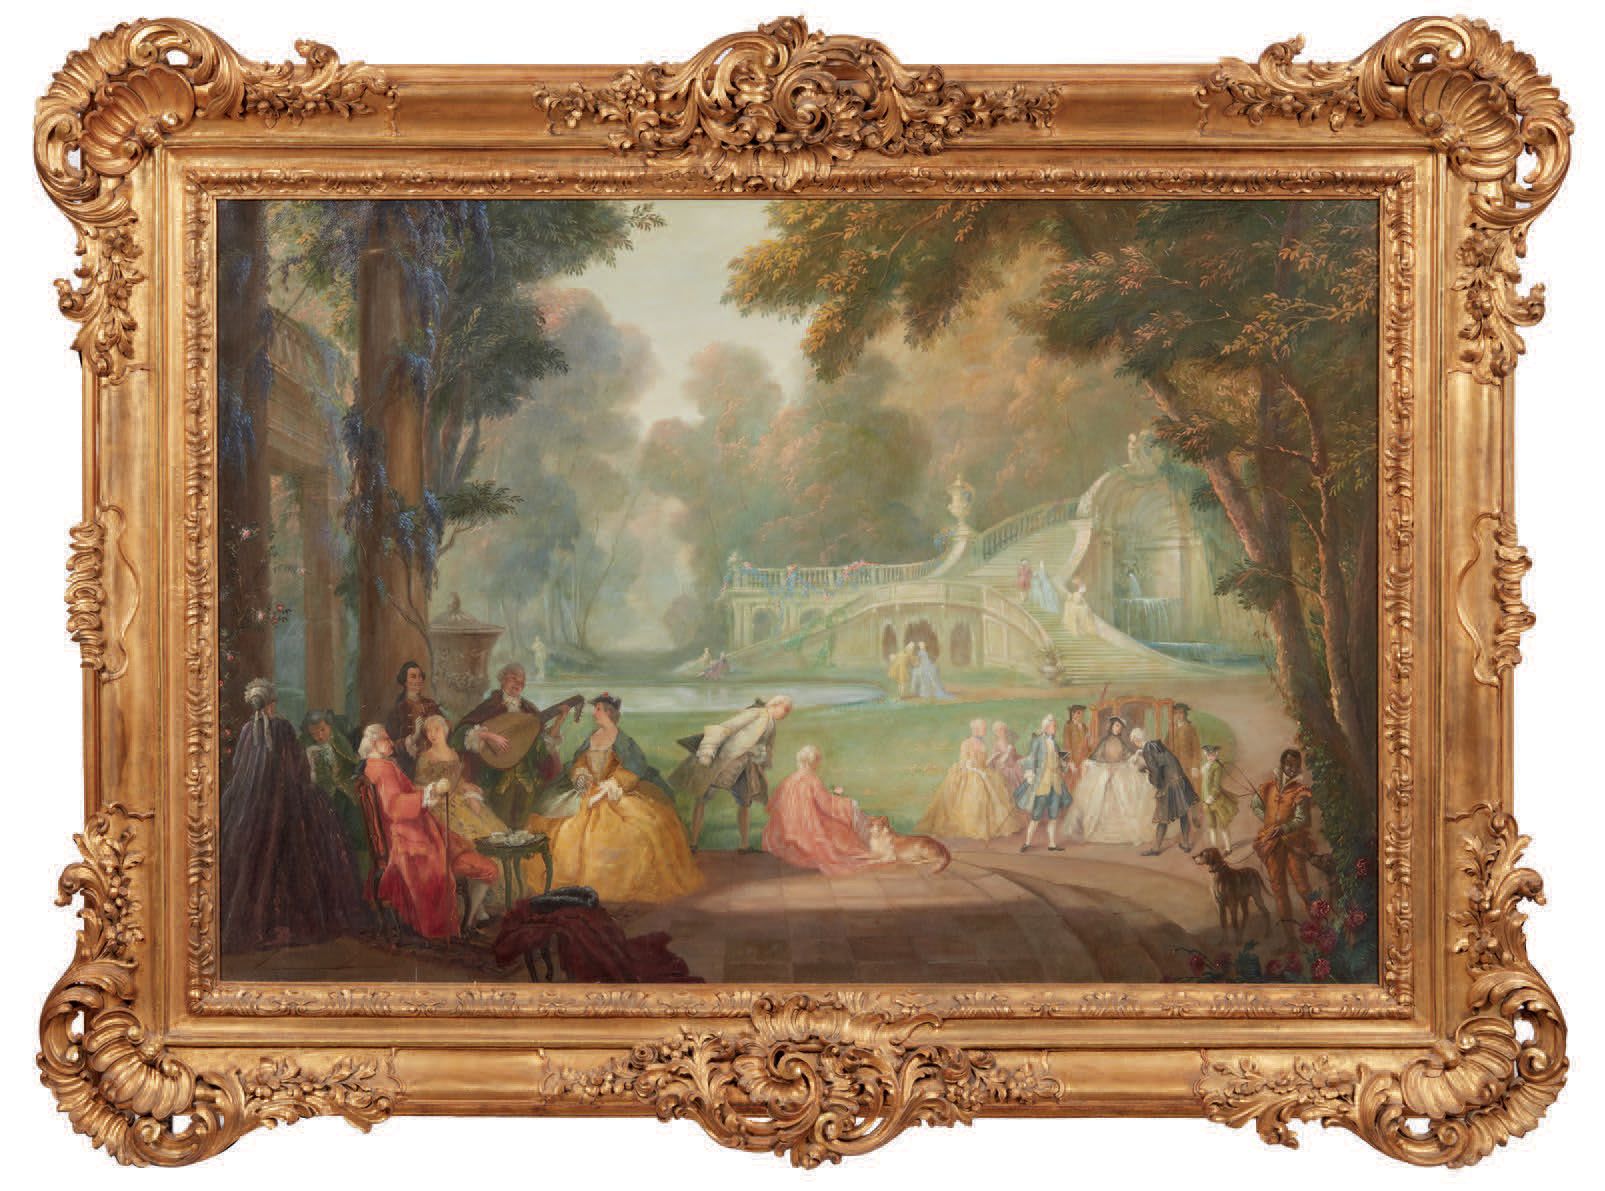 Scuola del XIX secolo "Fête galante" in the park of a princely palace
Oil on can&hellip;